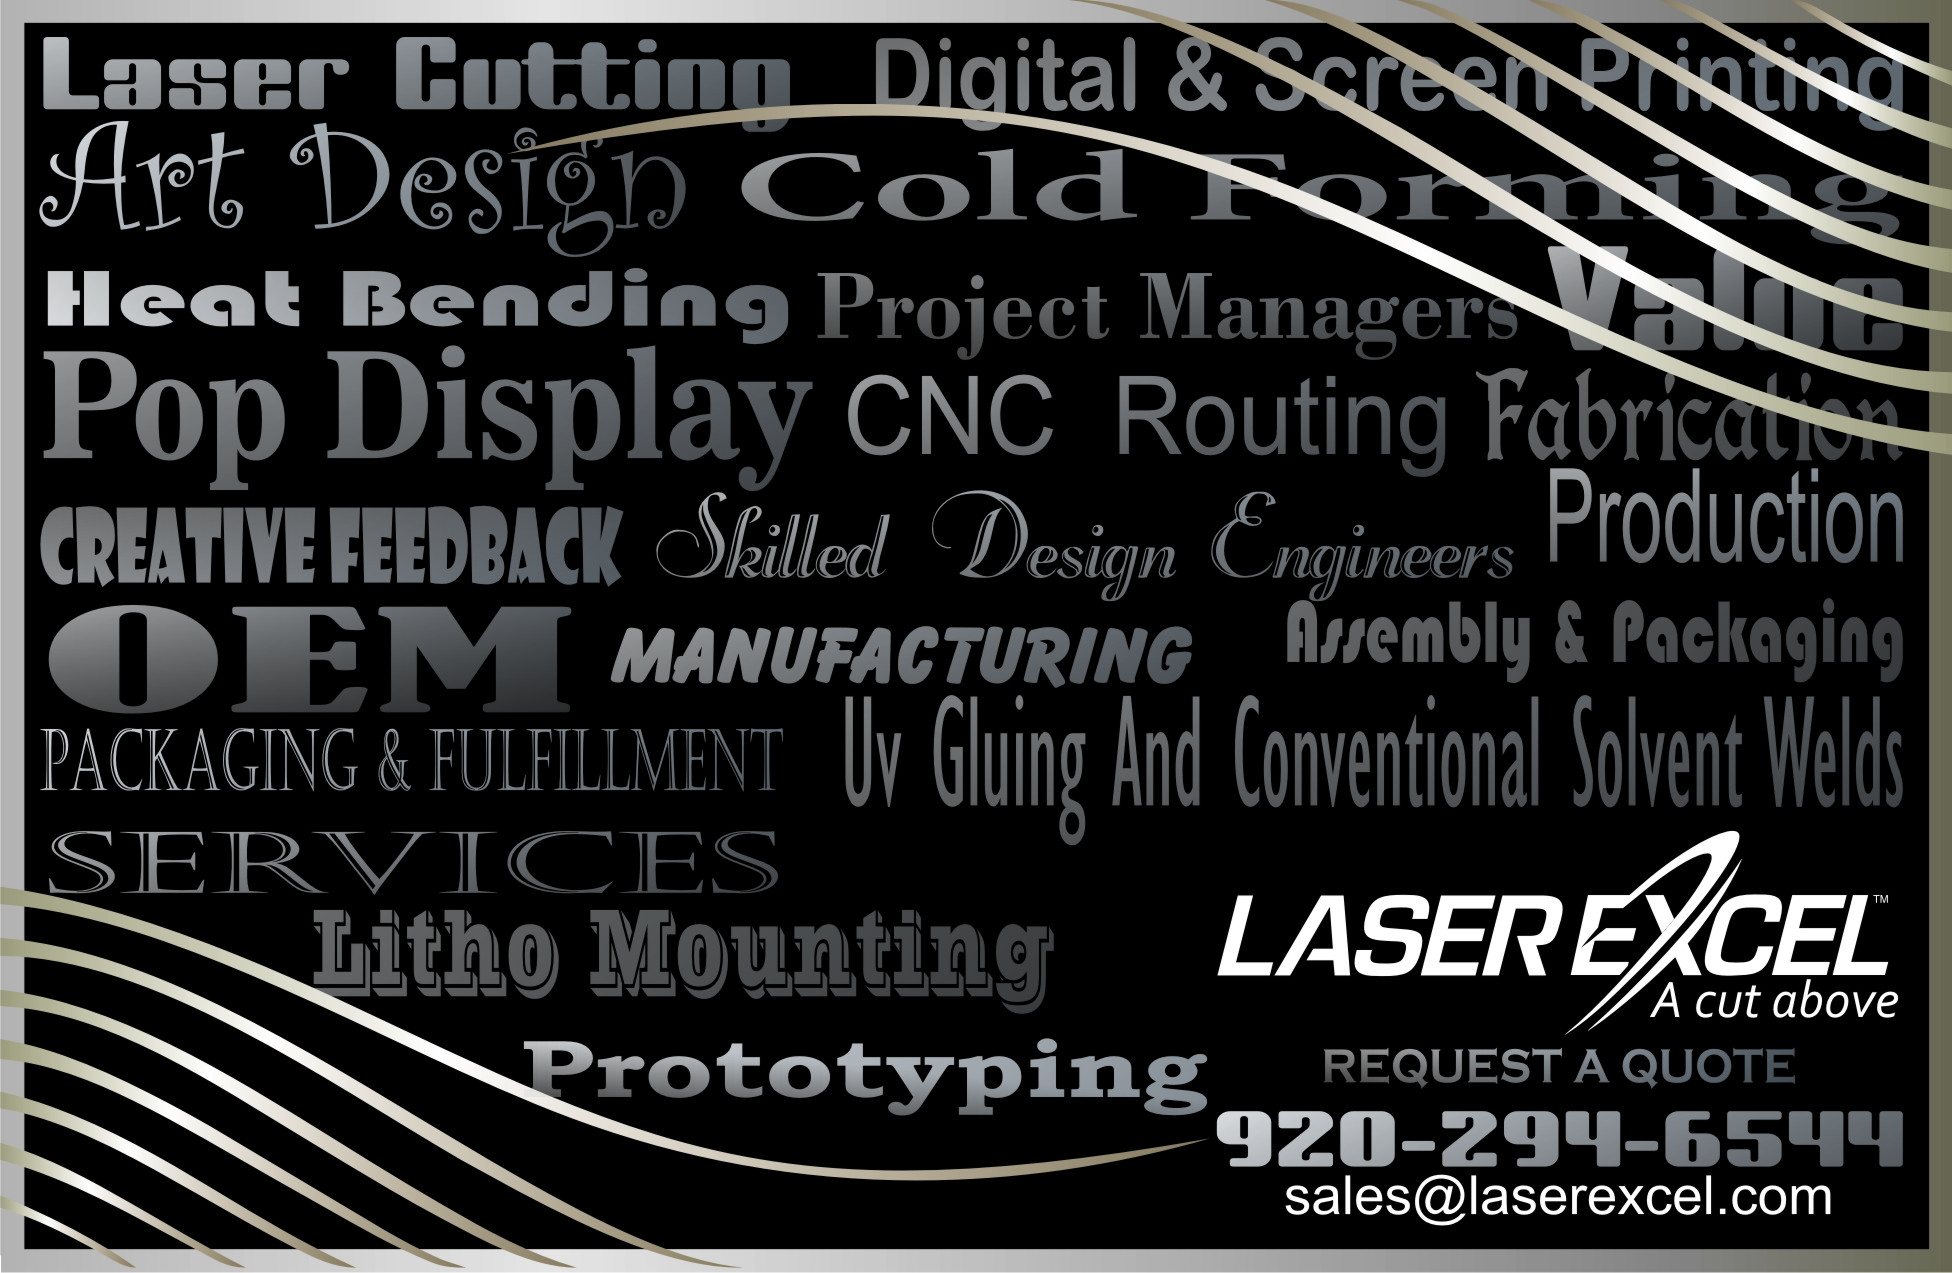 Laser Excel - Laser Cutting And Screen Printing Solutions